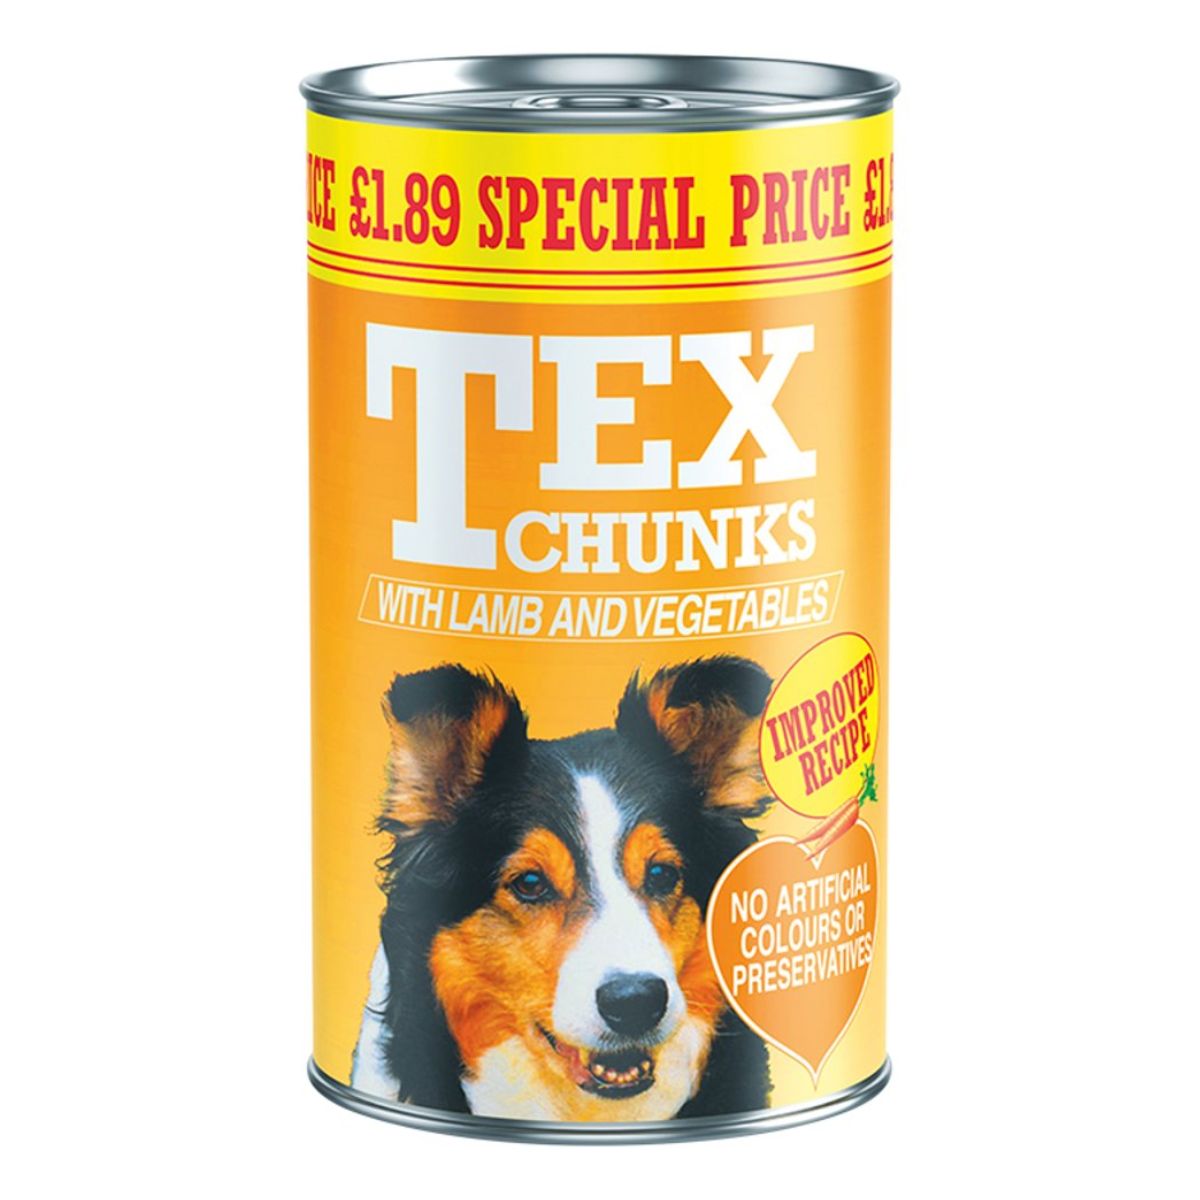 A can of Tex Chunks - with Lamb & Vegetables - 1.2kg dog food on a white background.